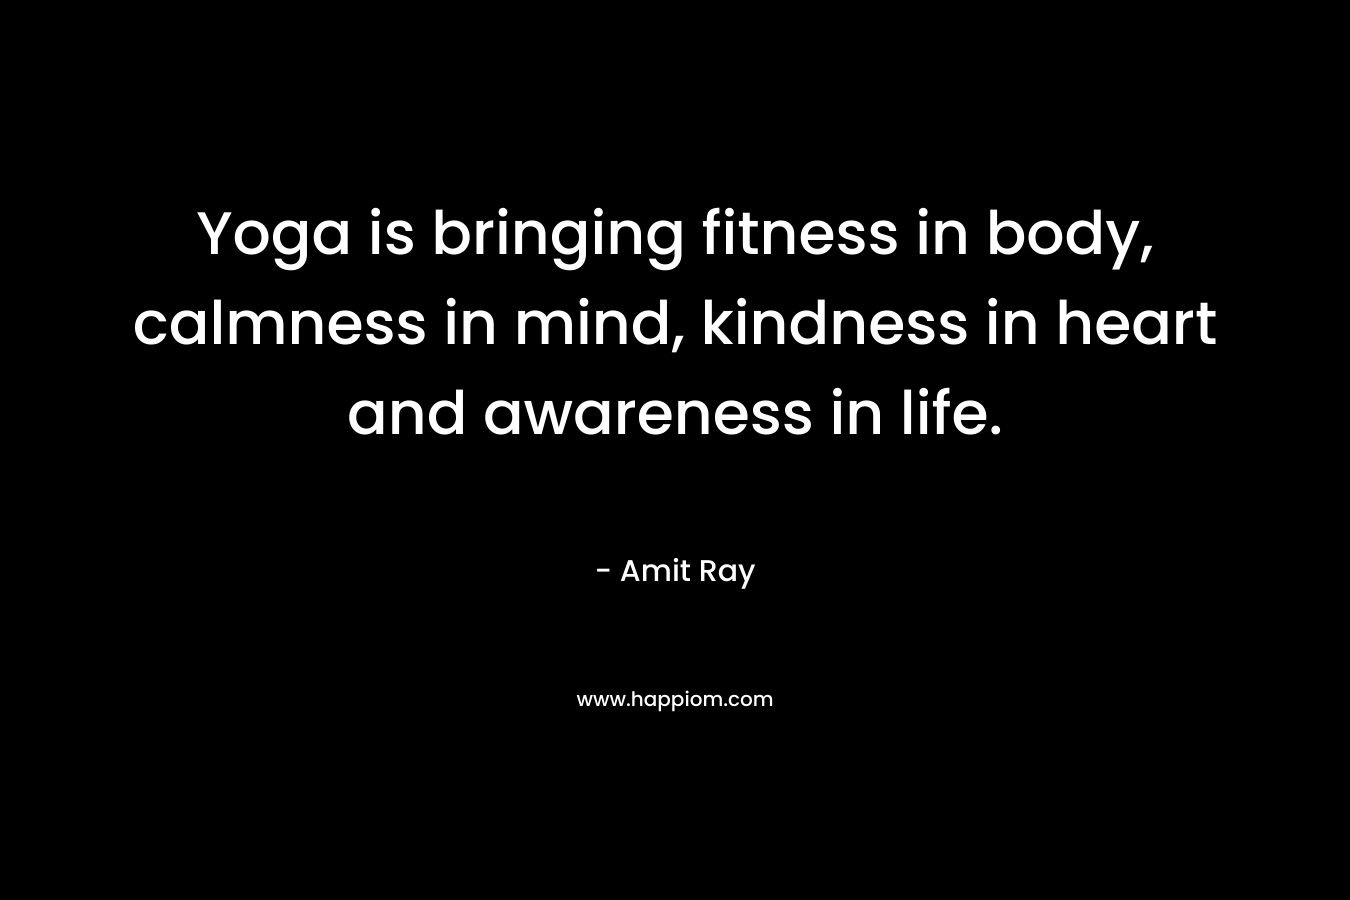 Yoga is bringing fitness in body, calmness in mind, kindness in heart and awareness in life.